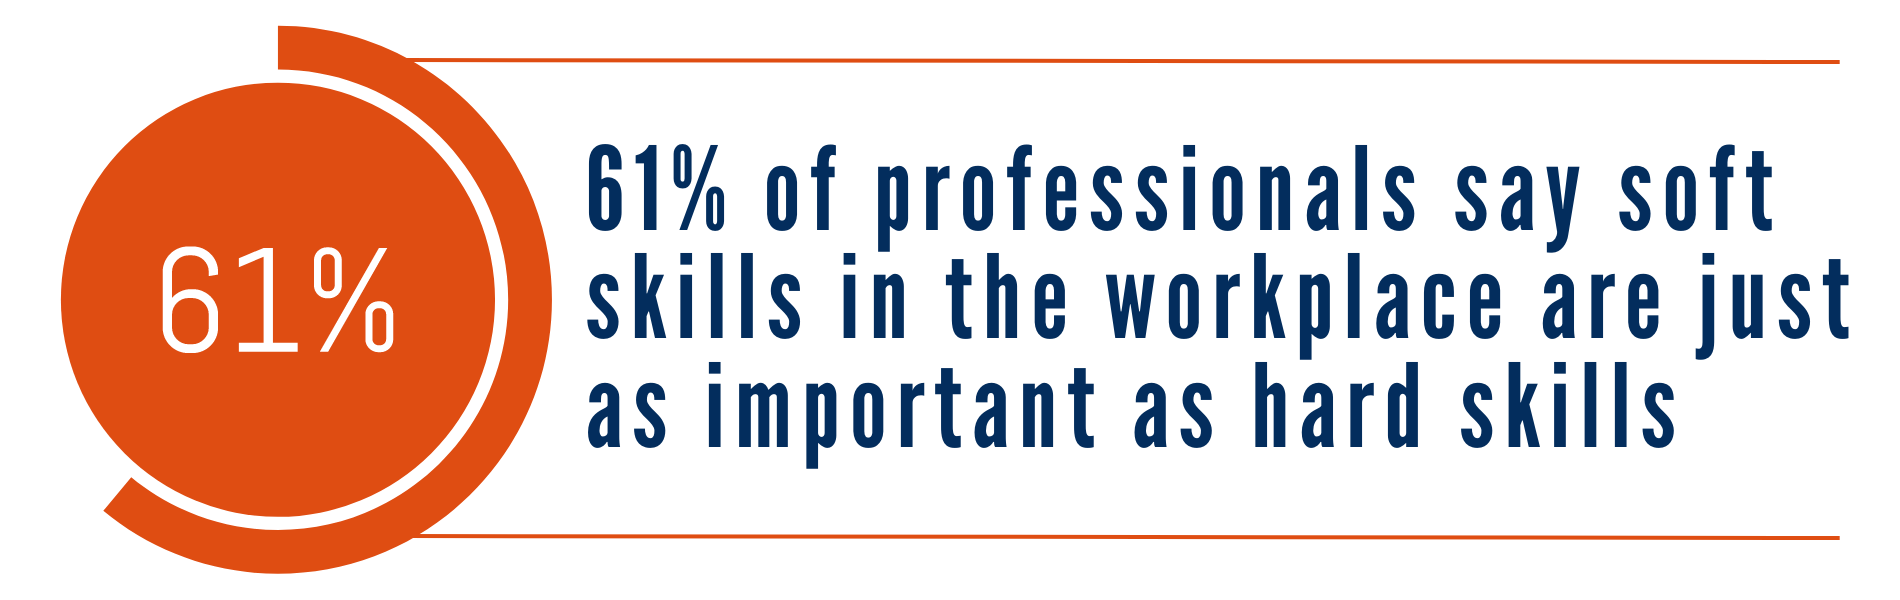 61% of professionals say soft skills are just as important as hard skills